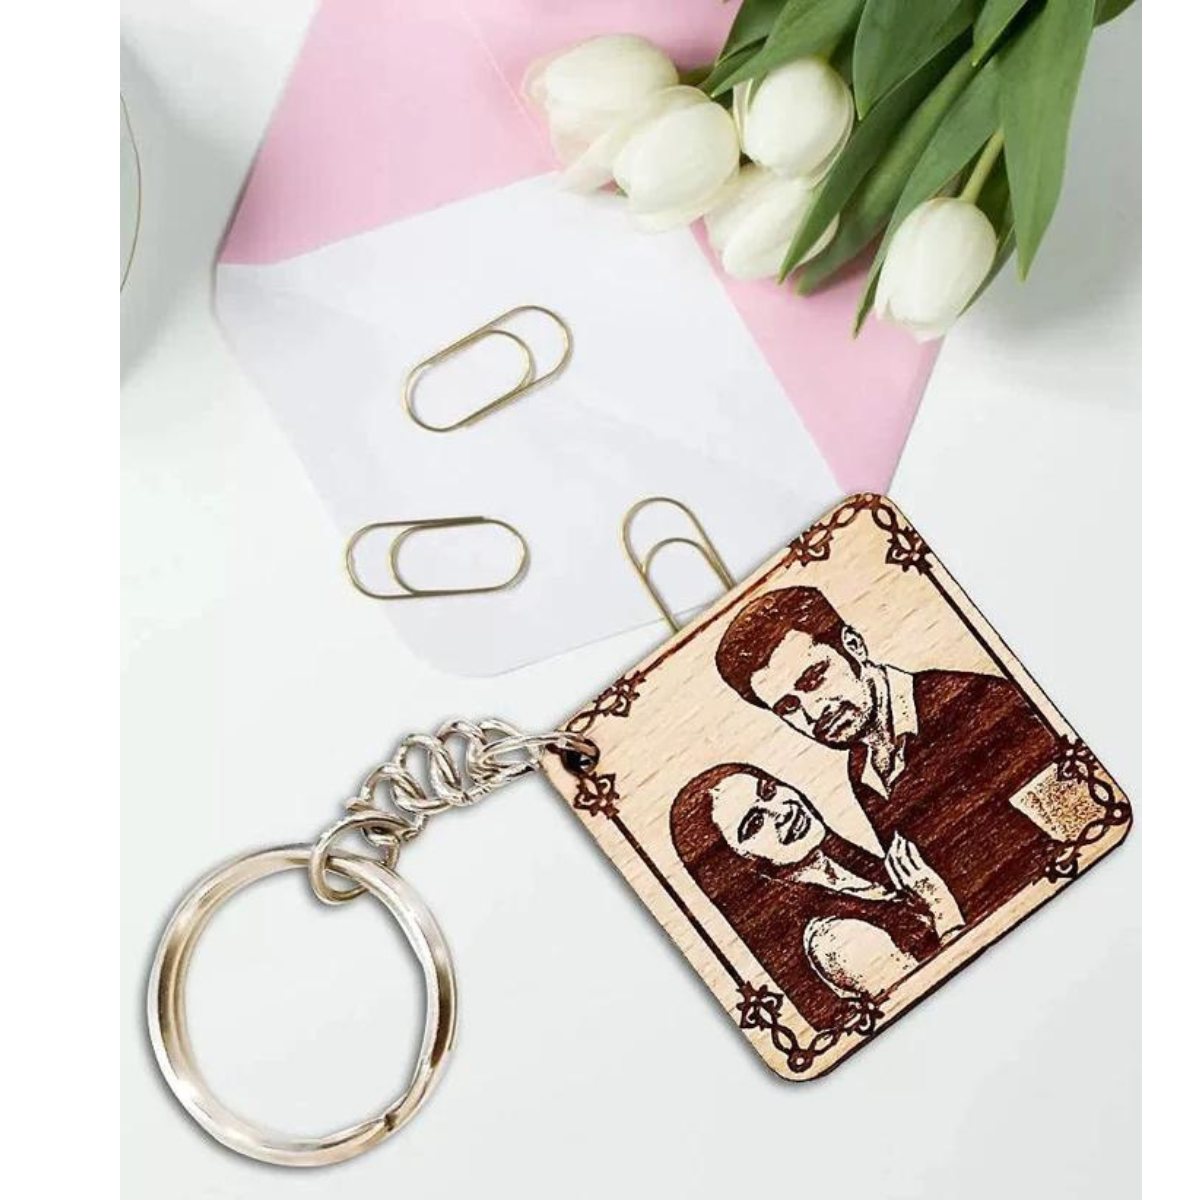 Wooden Engraved Personalized Photo Keychain